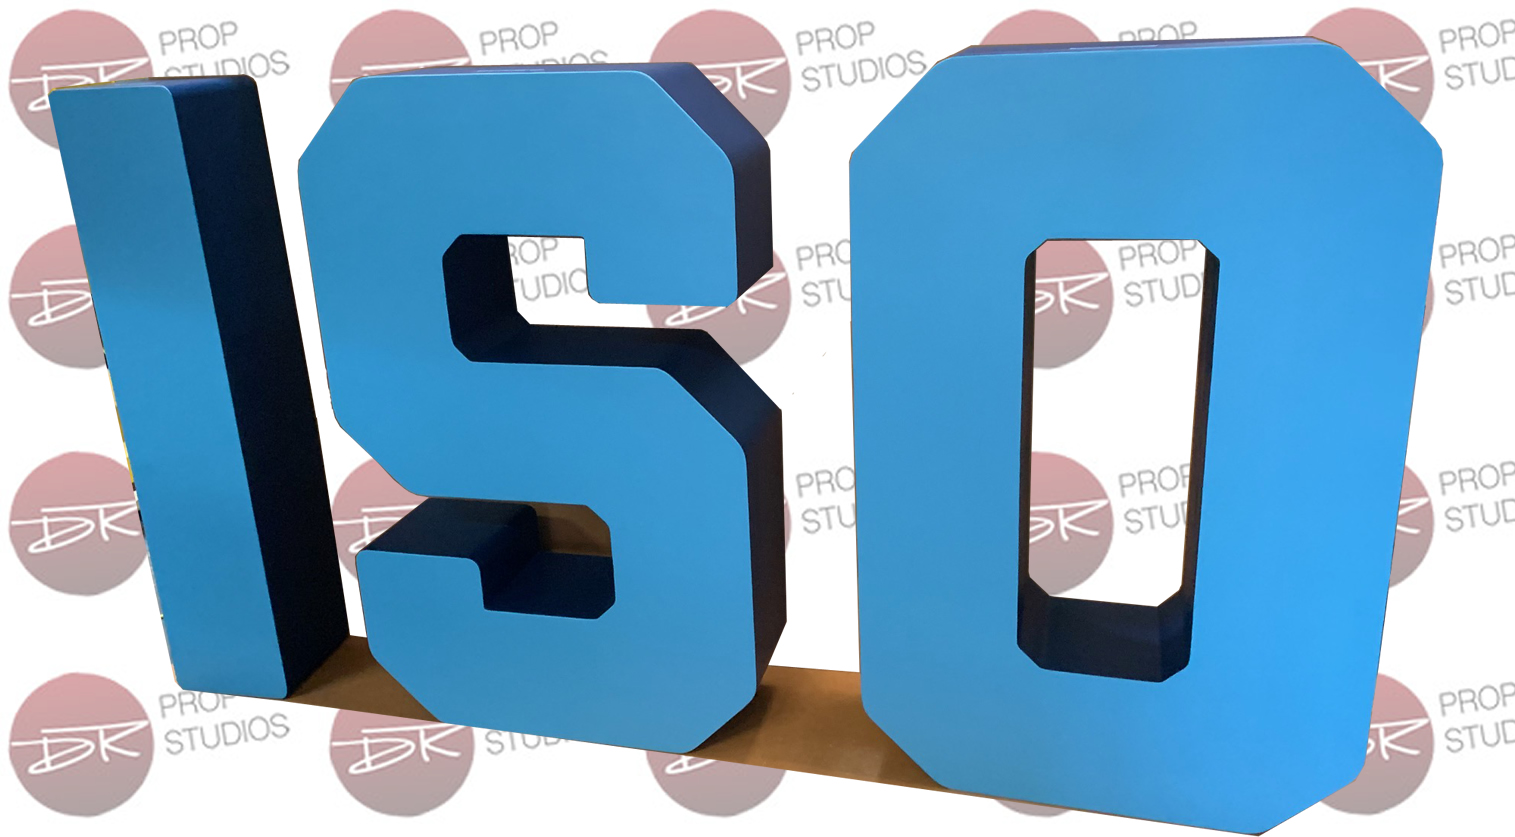 Large Foam Letters and Numbers for university and college displays